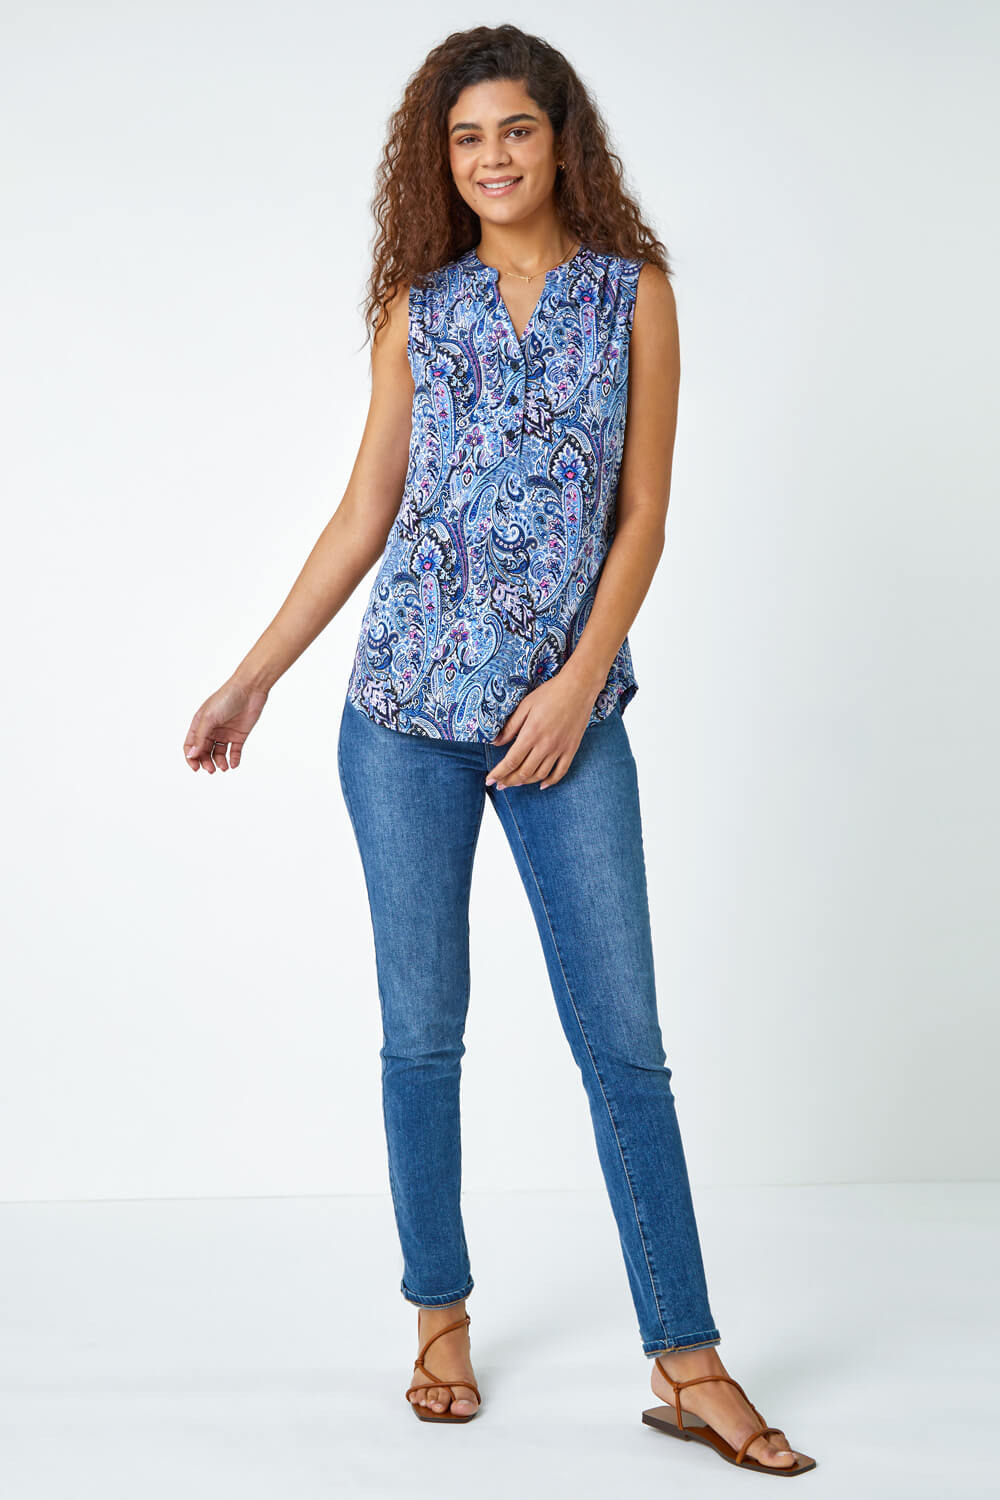 Blue Paisley Print Sleeveless Stretch Top, Image 2 of 5